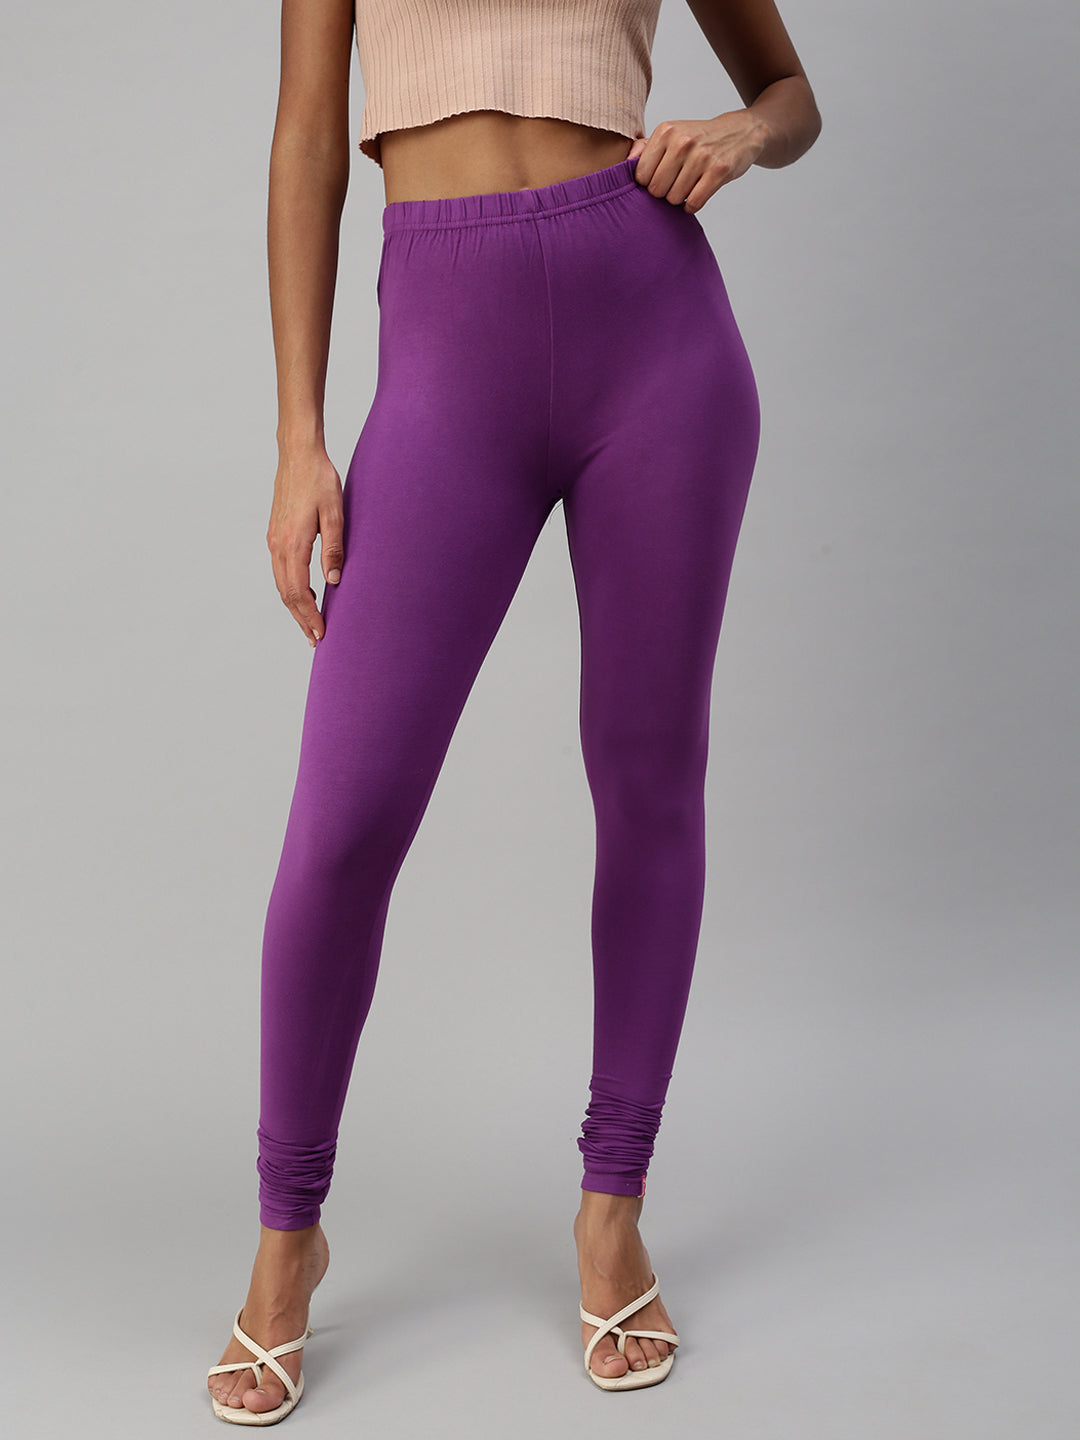 Stylish Violet Churidar Leggings by Prisma - Perfect Fit for Any Occasion